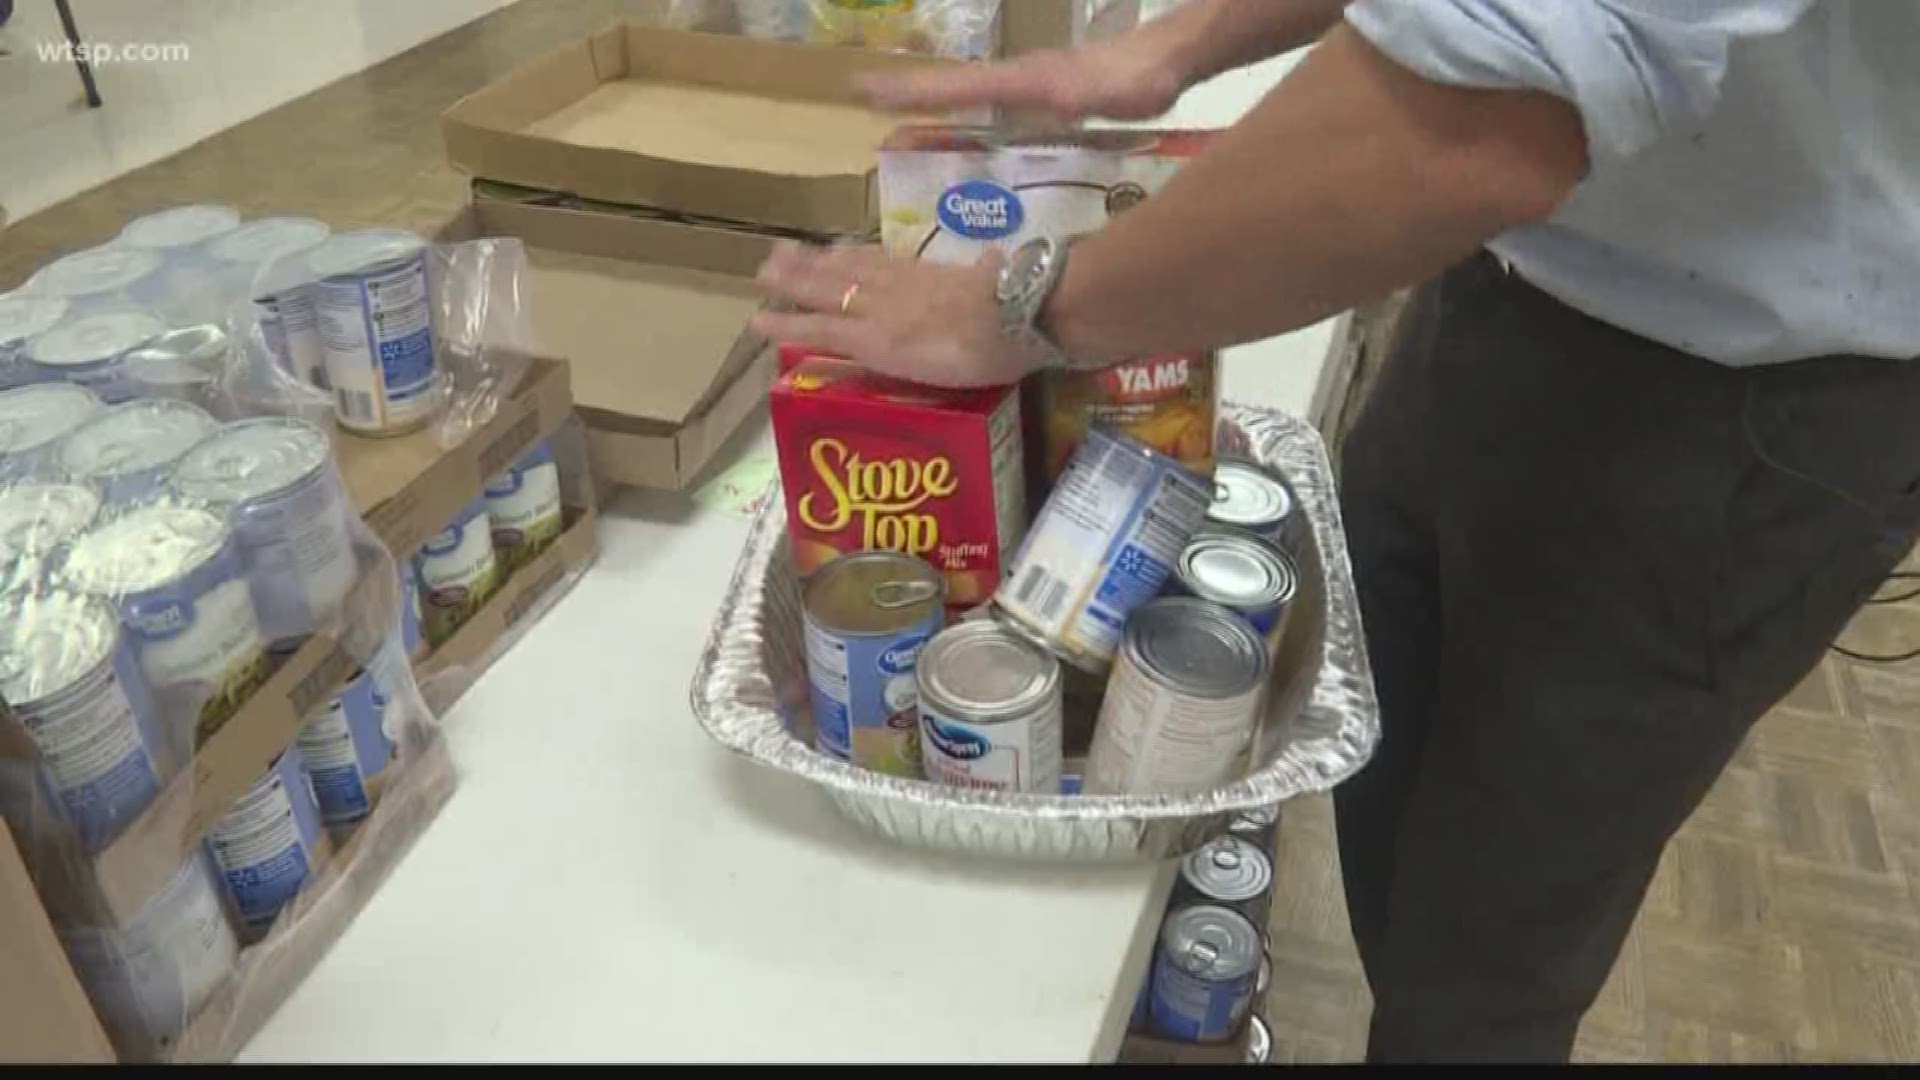 10News and Operation Homefront helped about 200 military families and veterans get all the ingredients they needed for a delicious holiday meal.